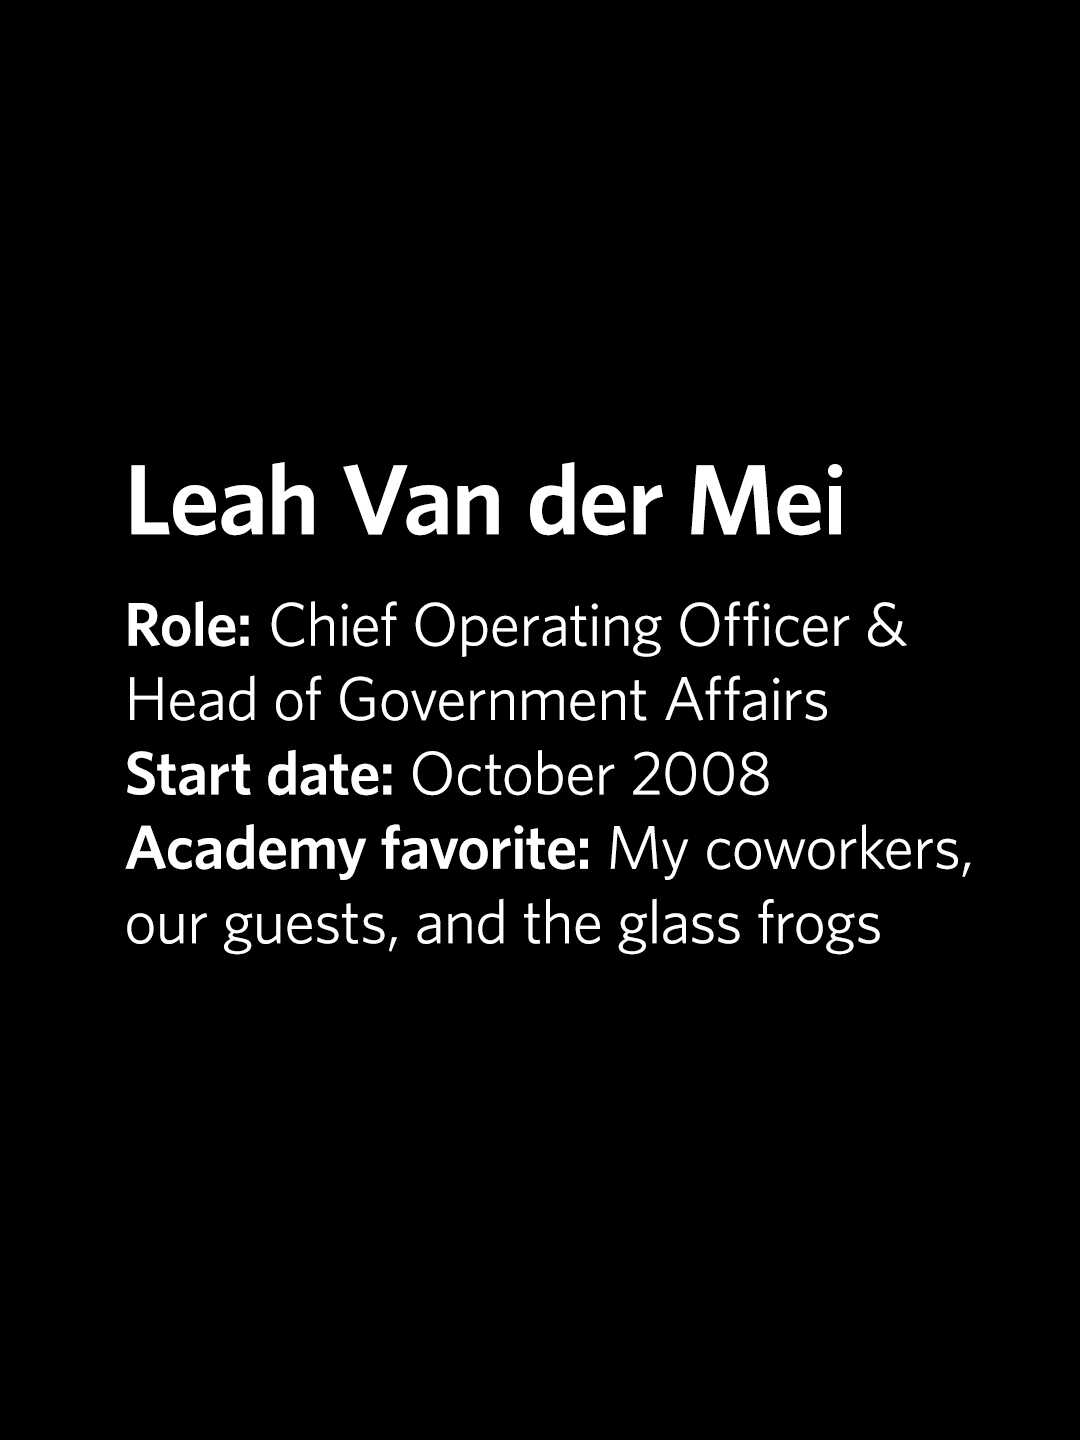 Leah Van der Mei, COO & Head of Government Affairs, started at Academy Oct. 2008, favorite things: coworkers, guests, glass frog